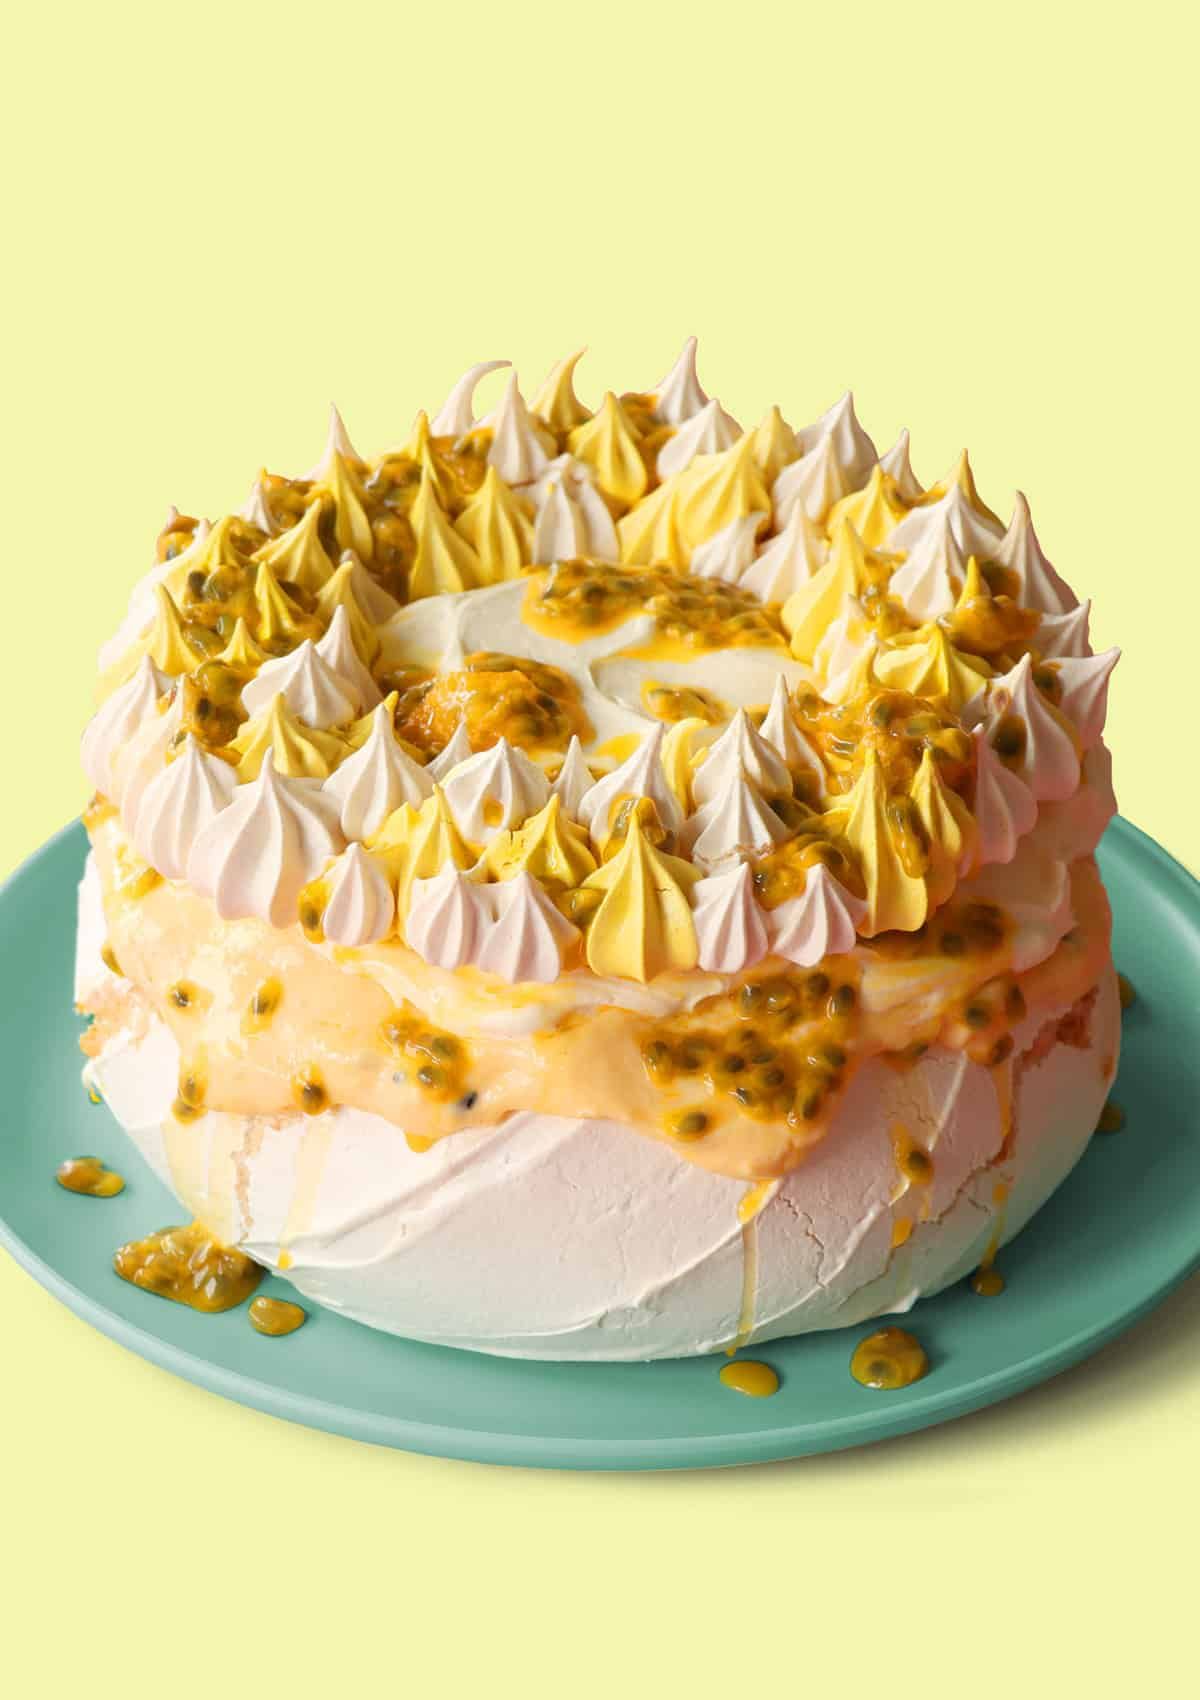 Mouth-watering passionfruit pavlova cake on a green tray.